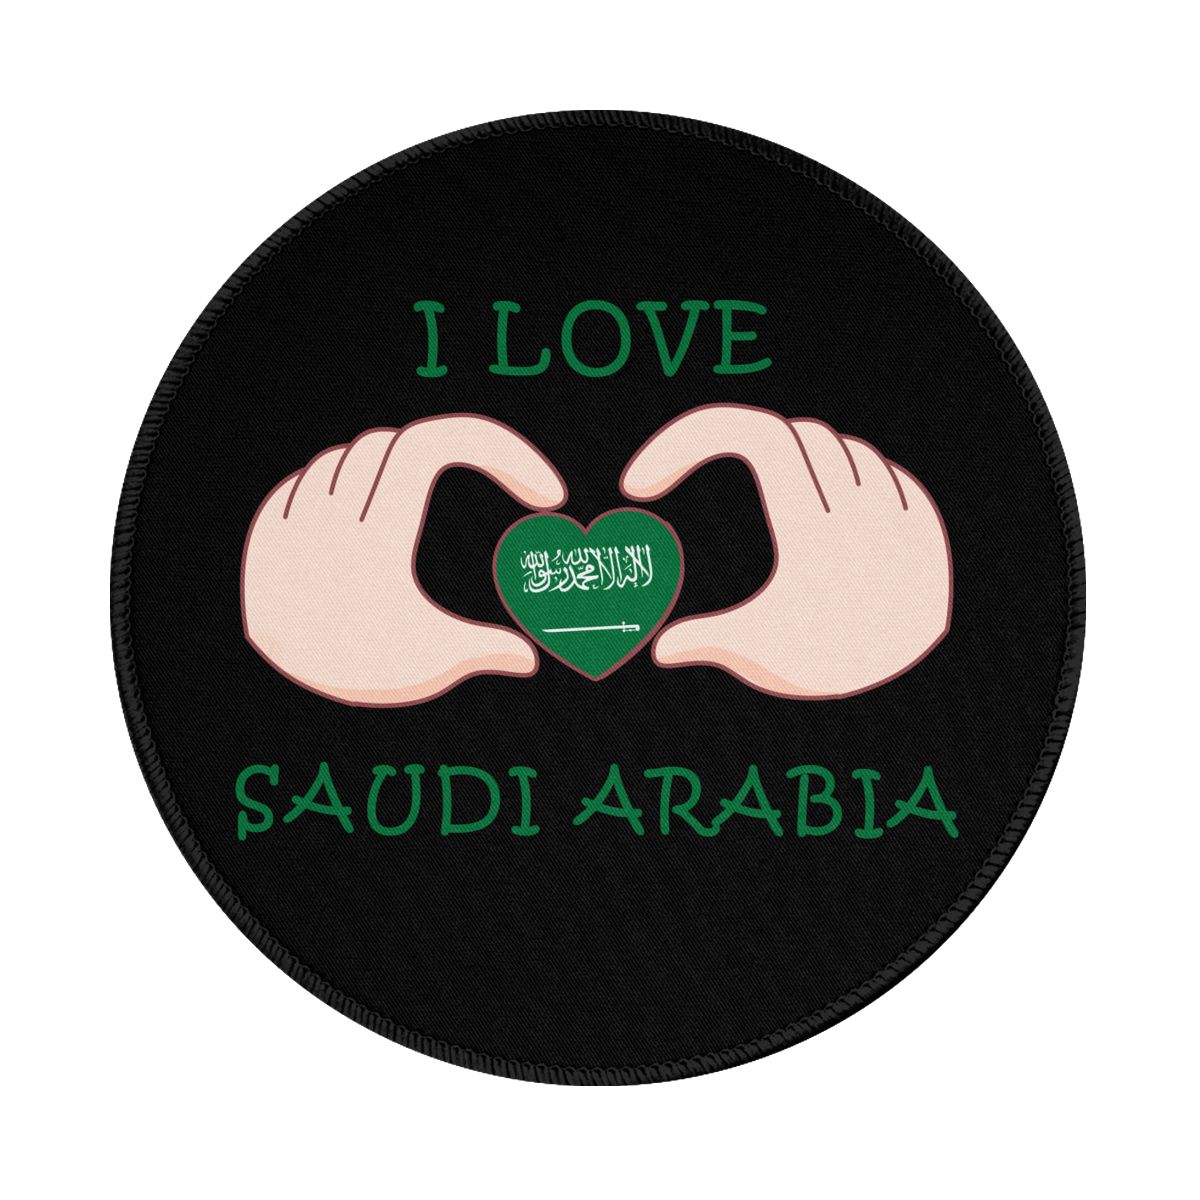 I Love Saudi Arabia Waterproof Round Mouse Pad for Wireless Mouse